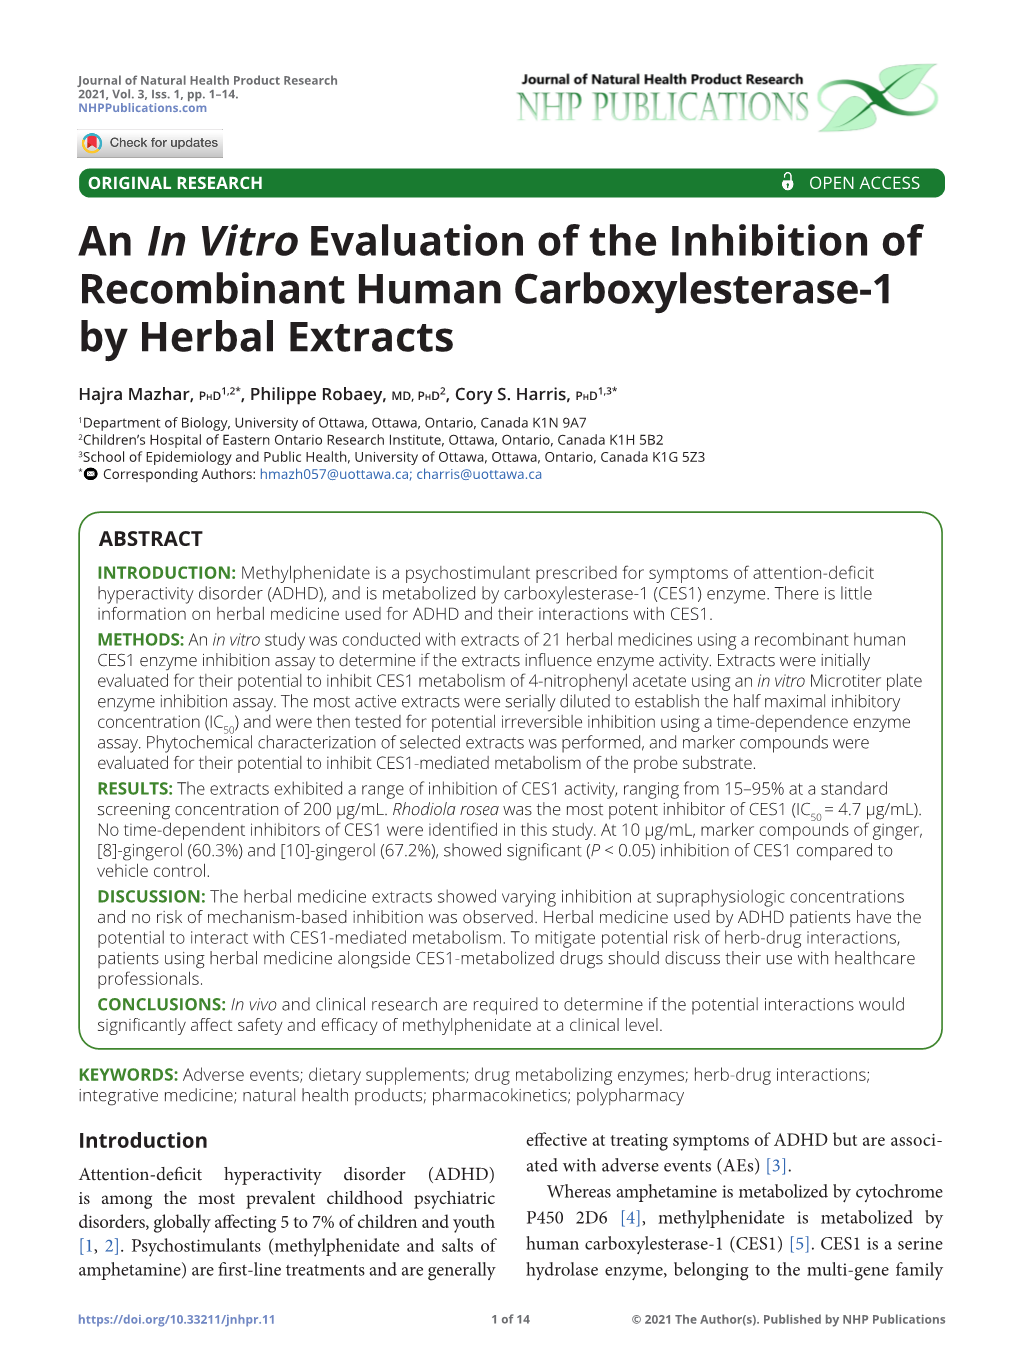 An in Vitro Evaluation of the Inhibition of Recombinant Human Carboxylesterase-1 by Herbal Extracts